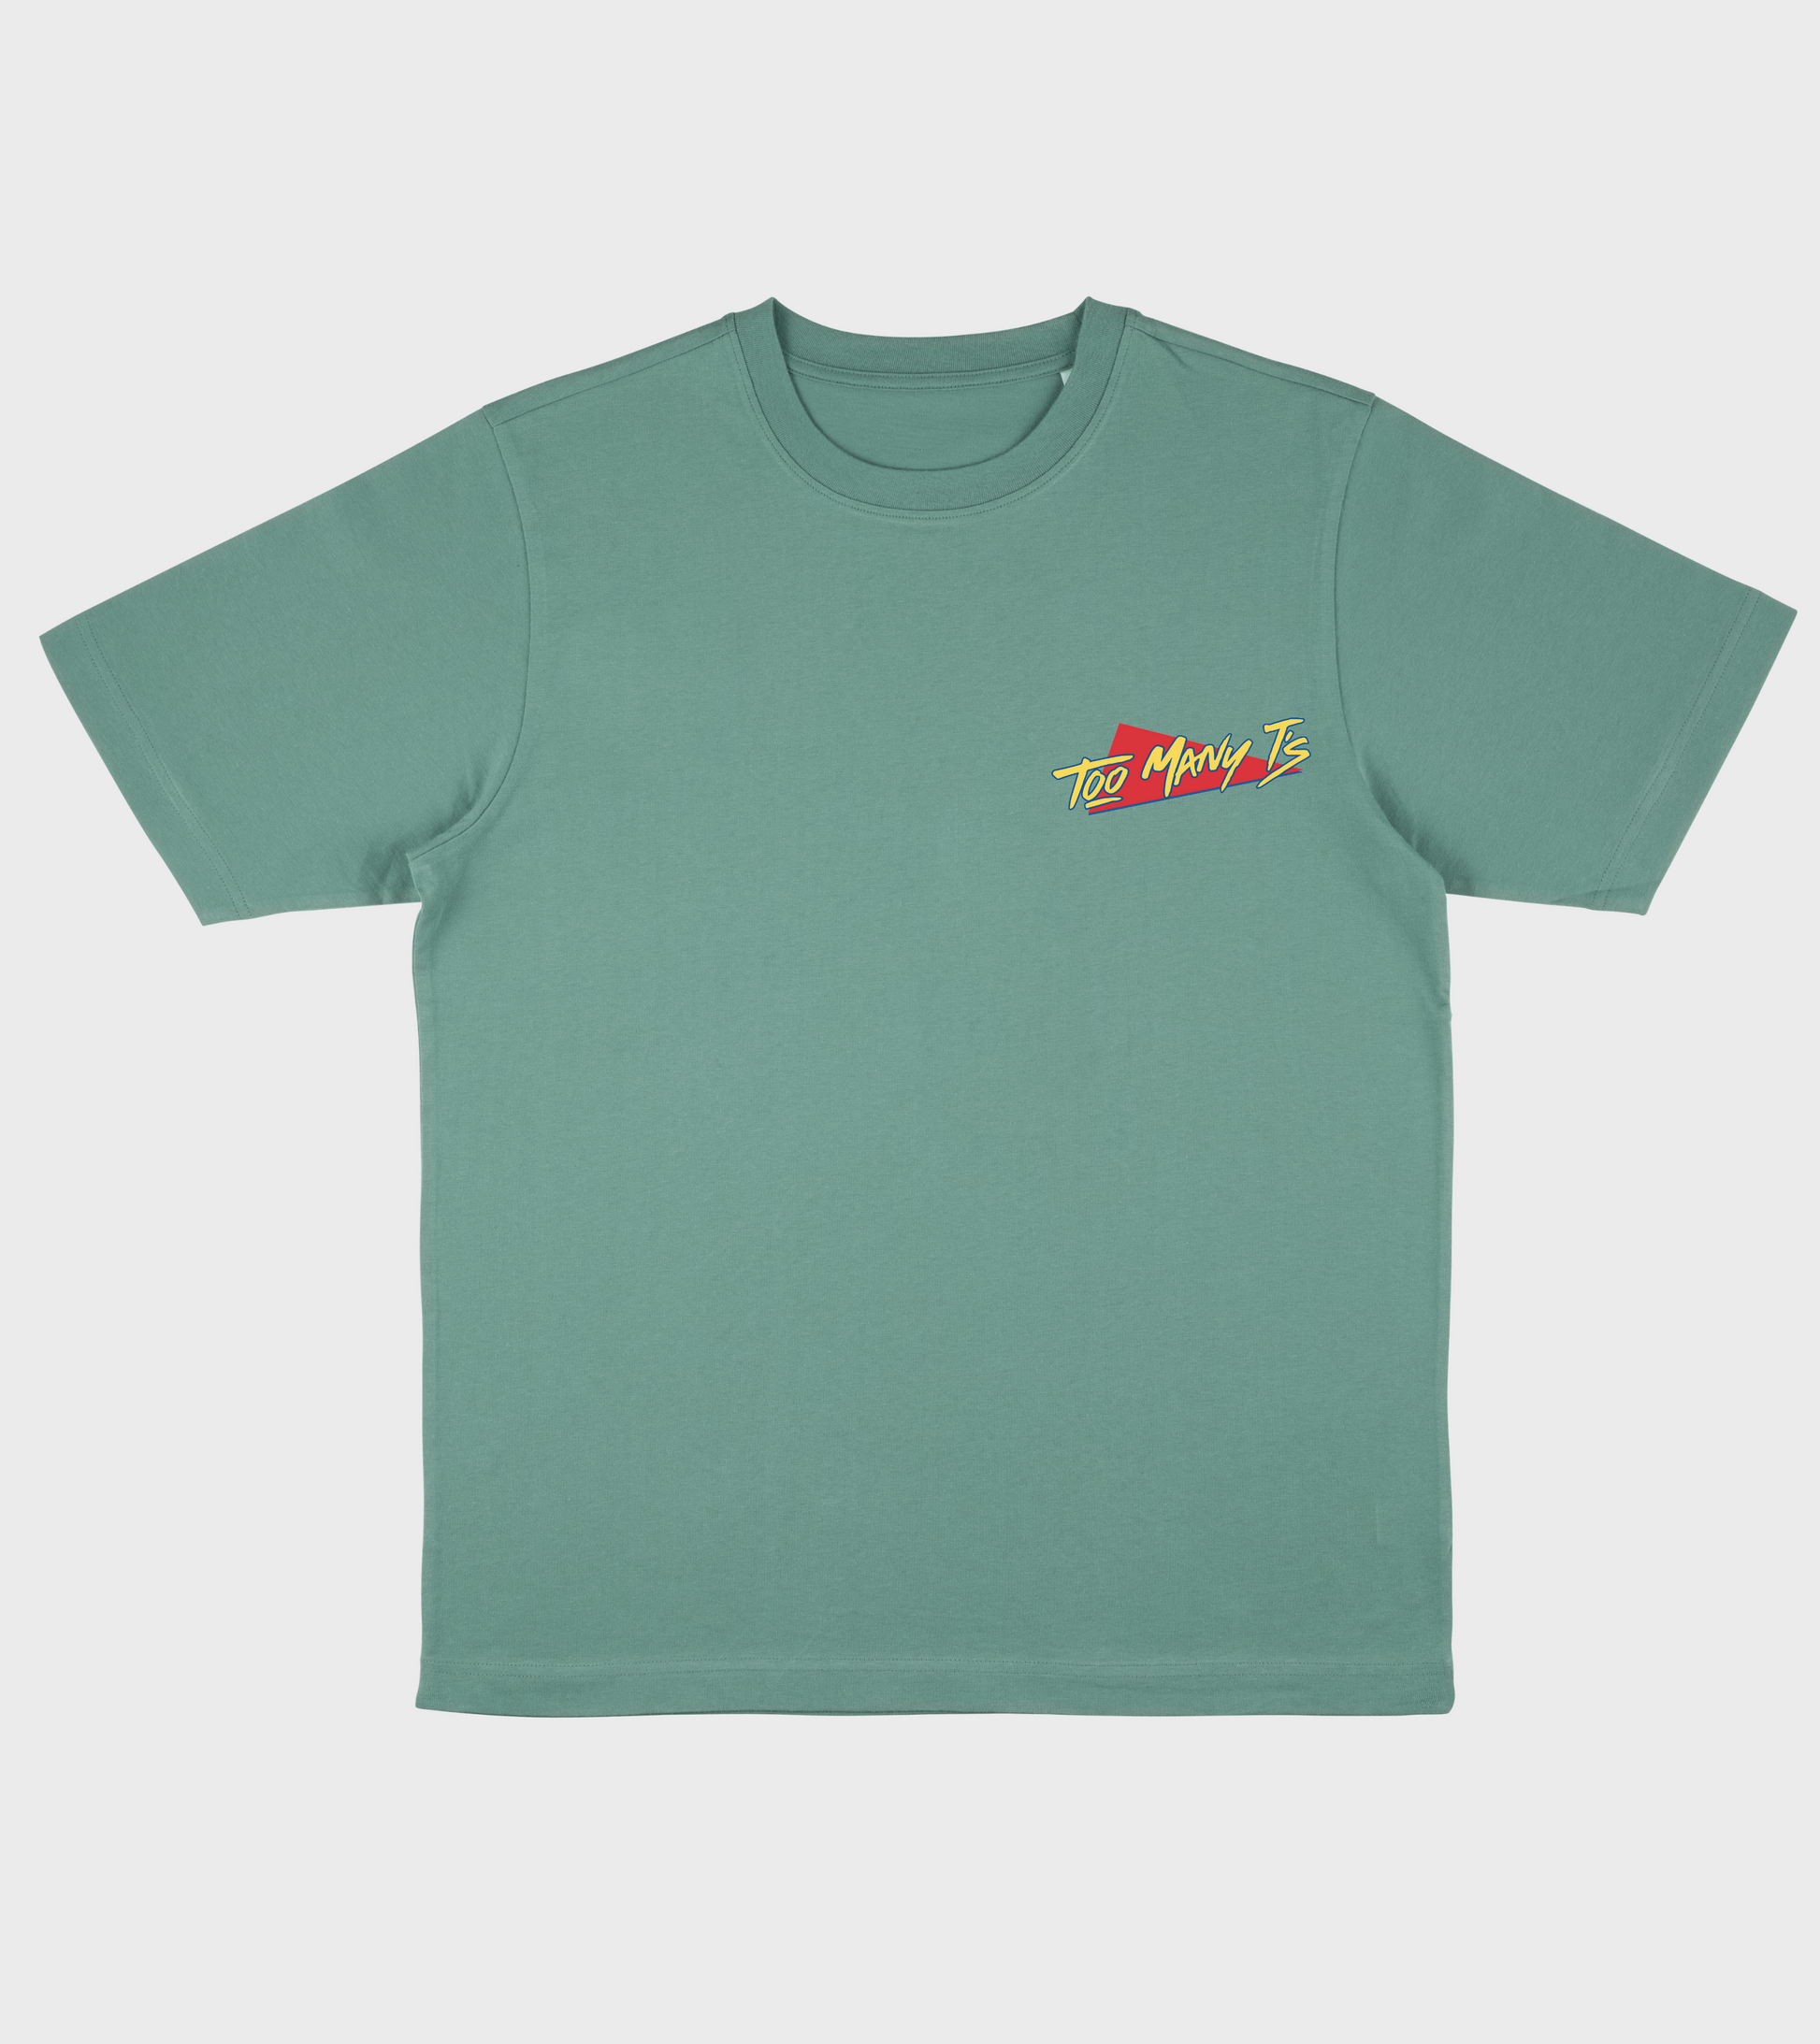 Green oversized t-shirt with red and yellow classic TOO MANY T'S designs.